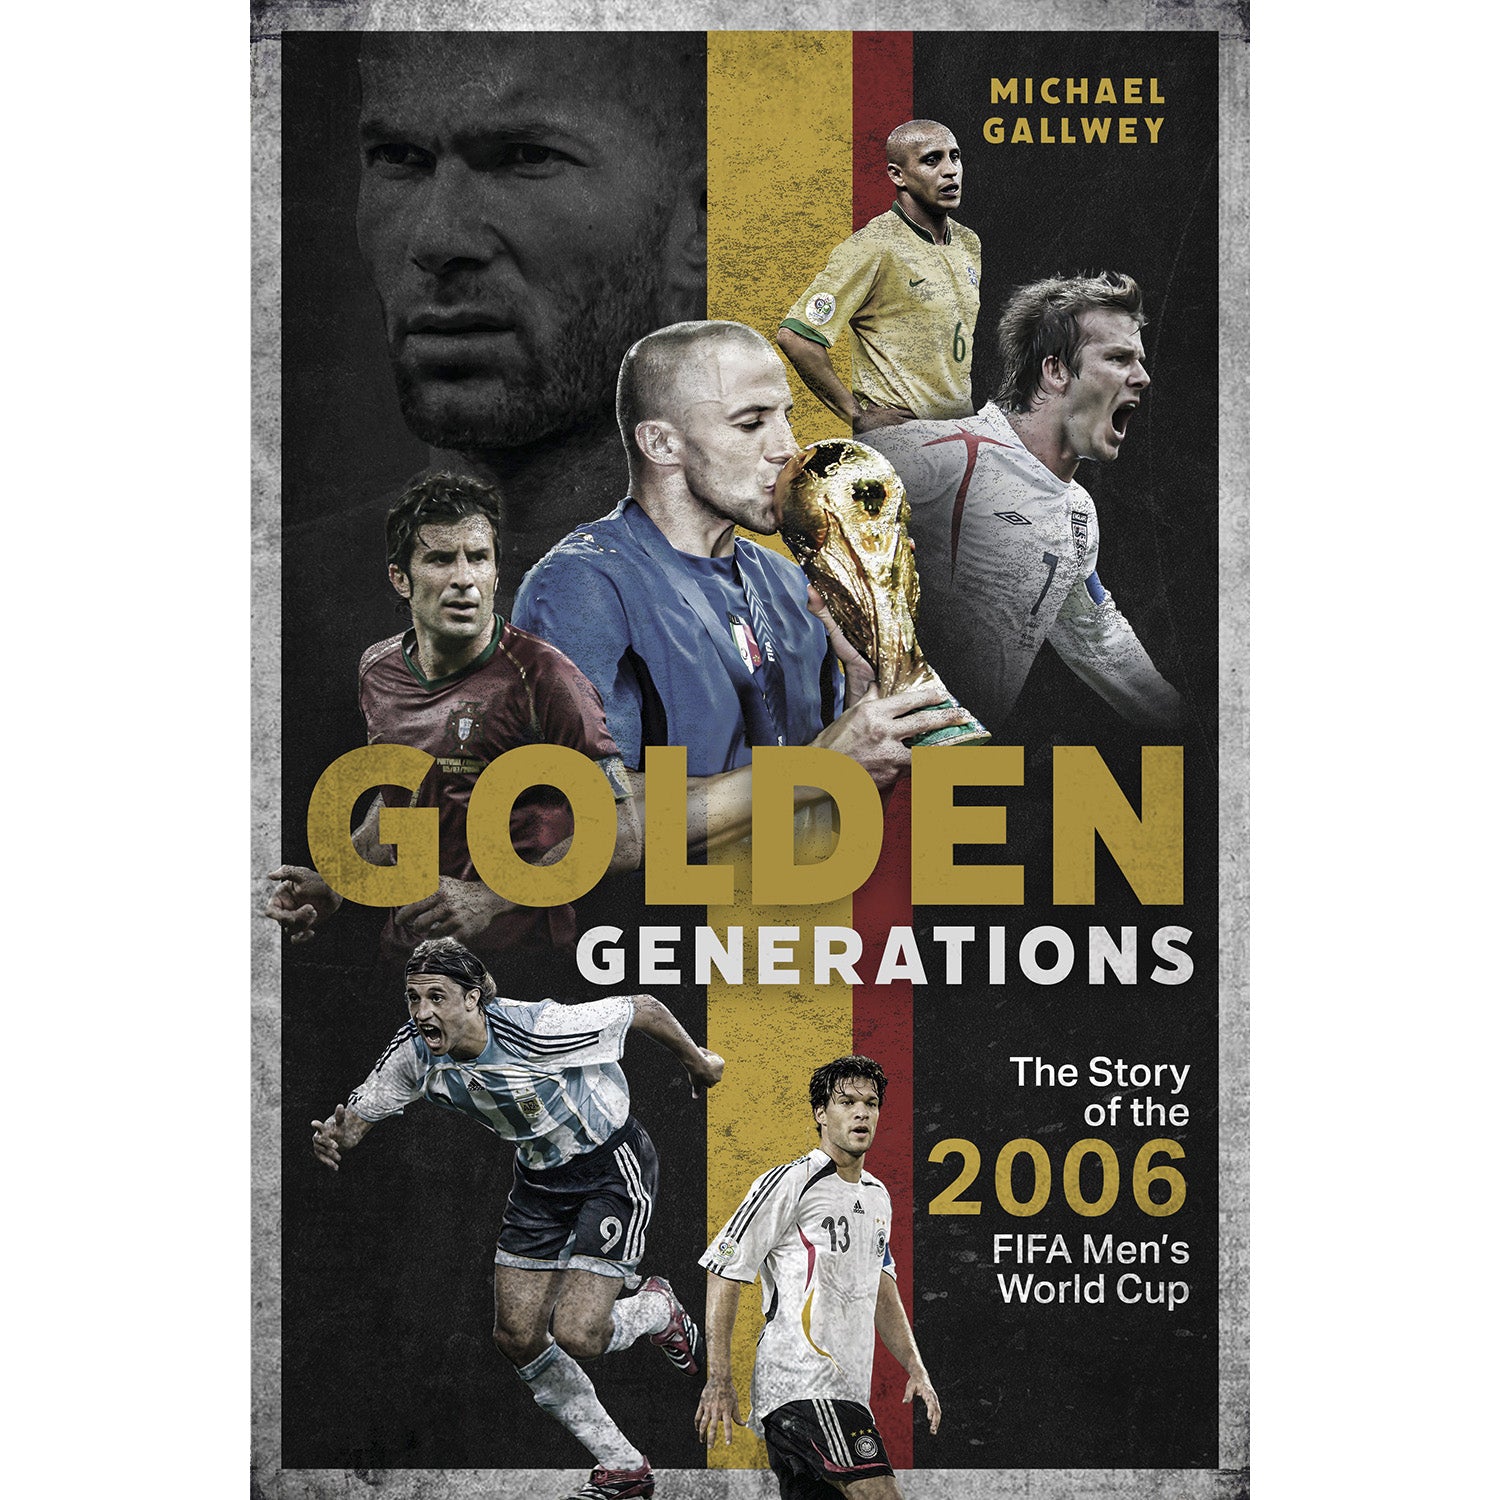 Golden Generations – The Story of the 2006 FIFA Men's World Cup